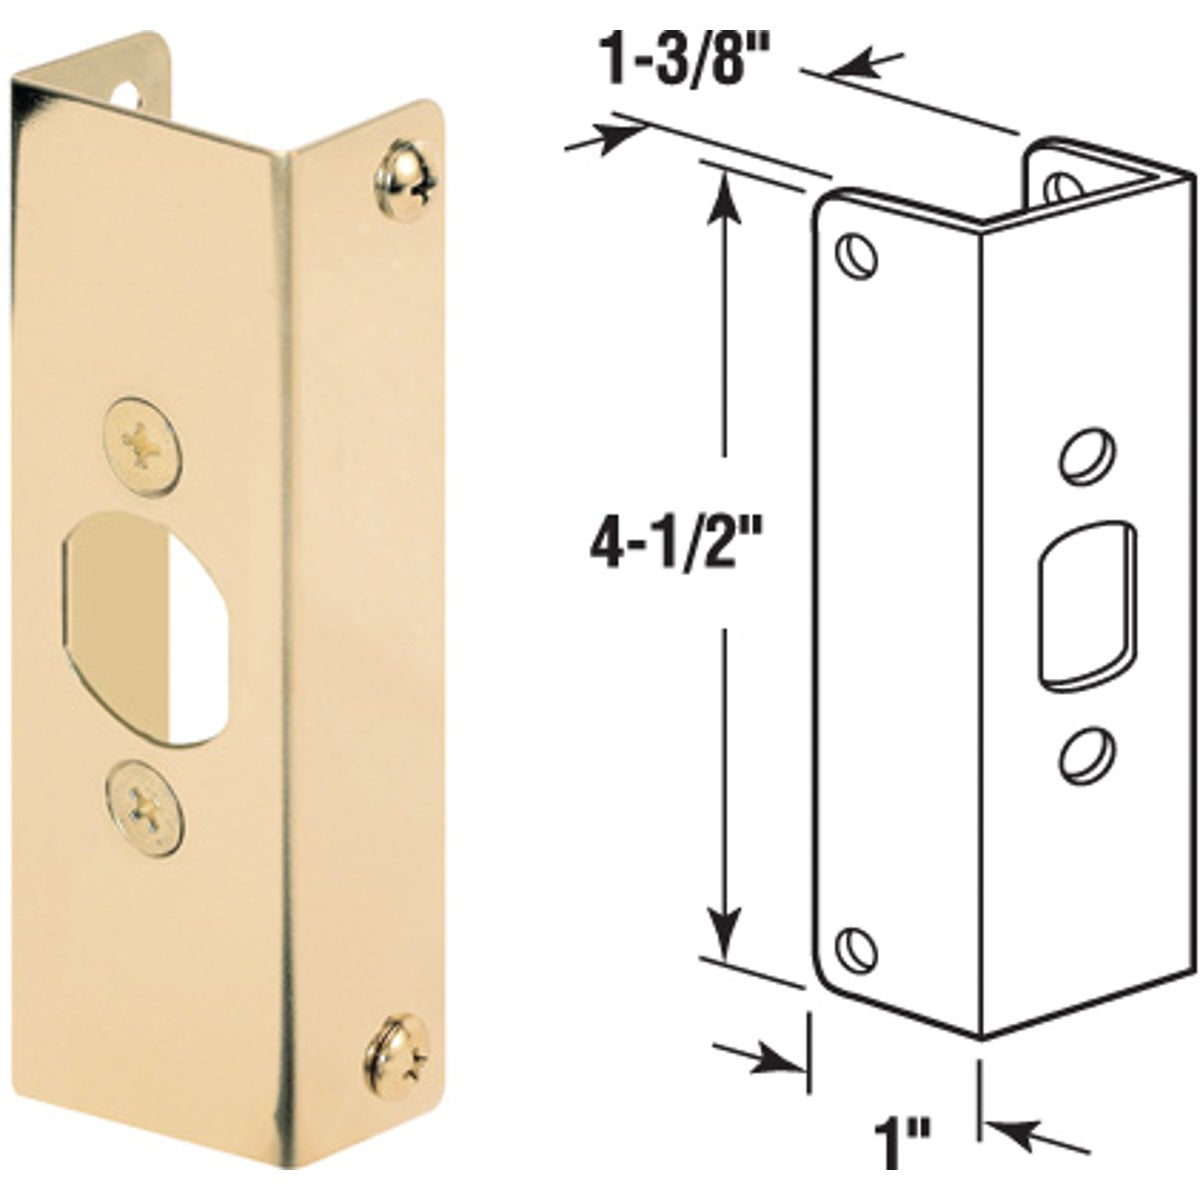 Item 206520, Reinforces deadbolt and key-in-knob locks by more than doubling strength of